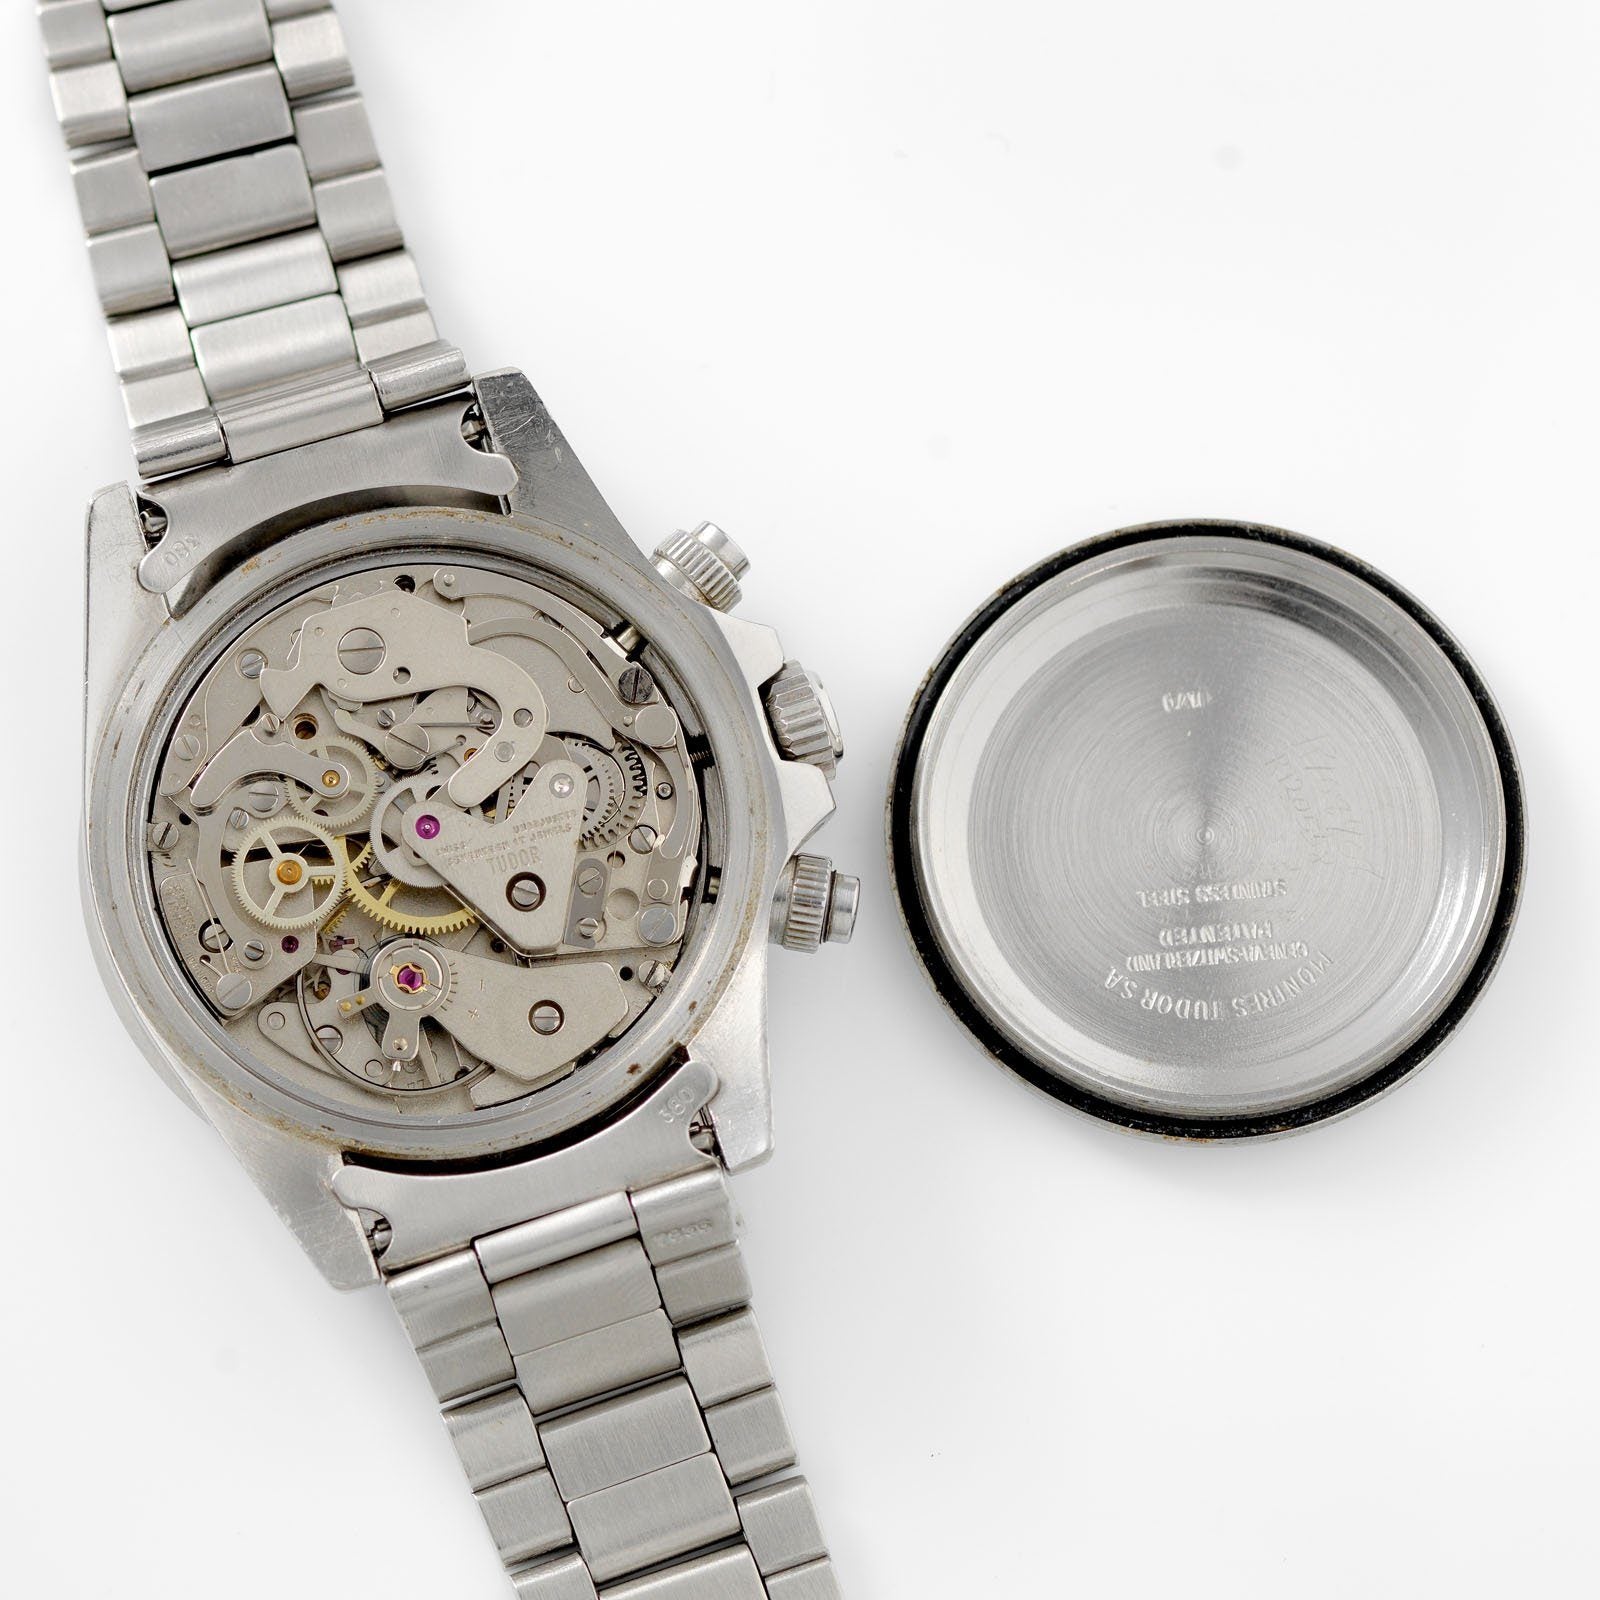 Tudor Home Plate Chronograph 7032 Box and Papers